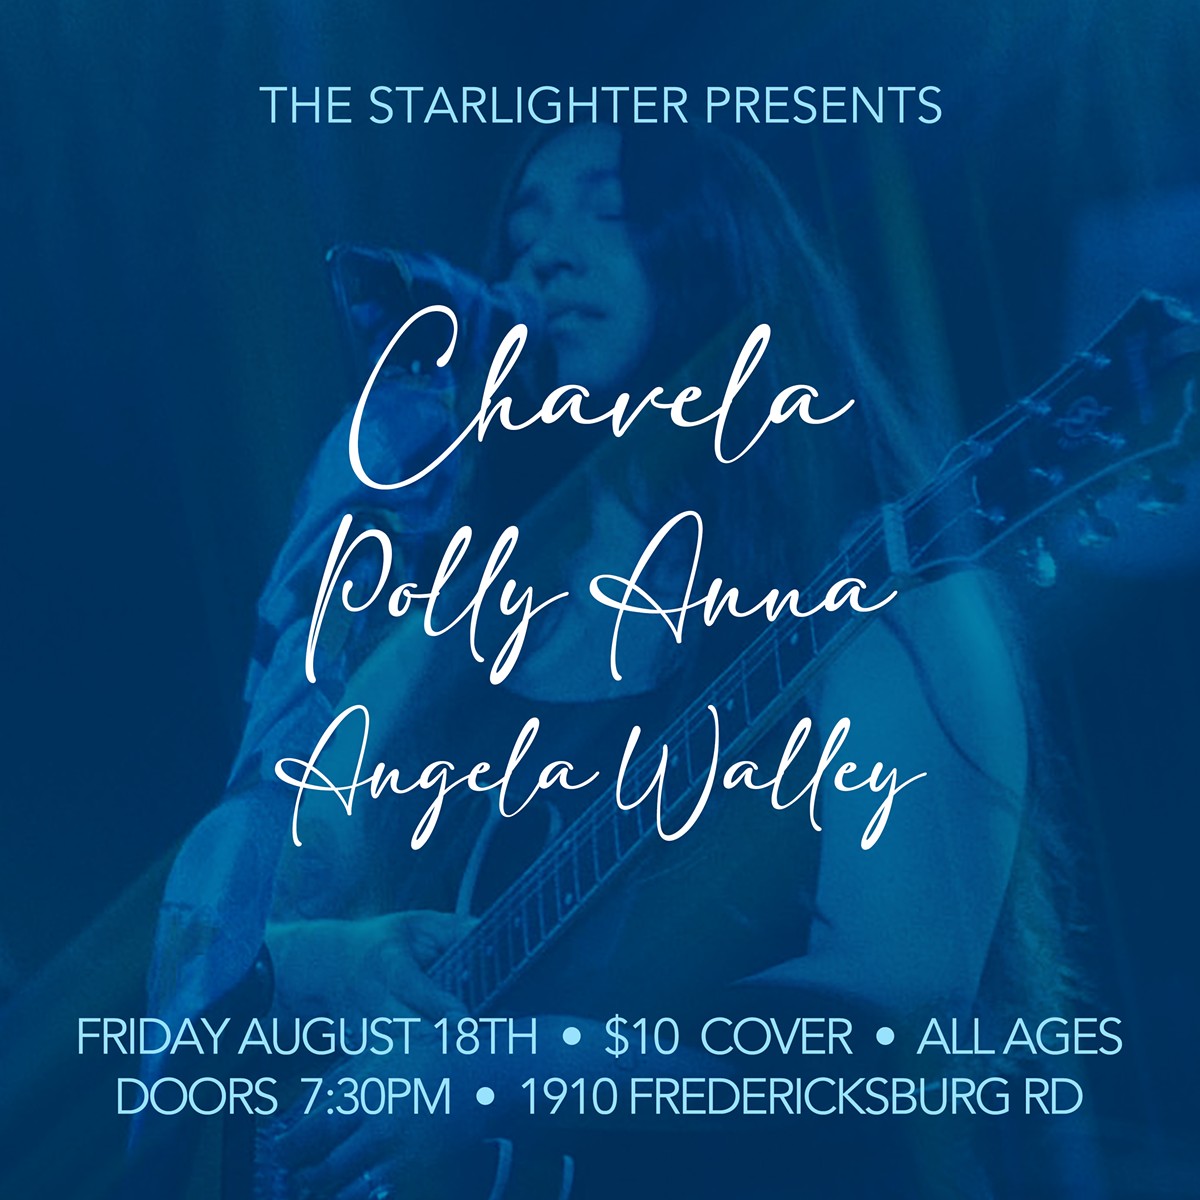 The Starlighter presents live music by Chavela, Polly Anna, and Angela Guerra Walley